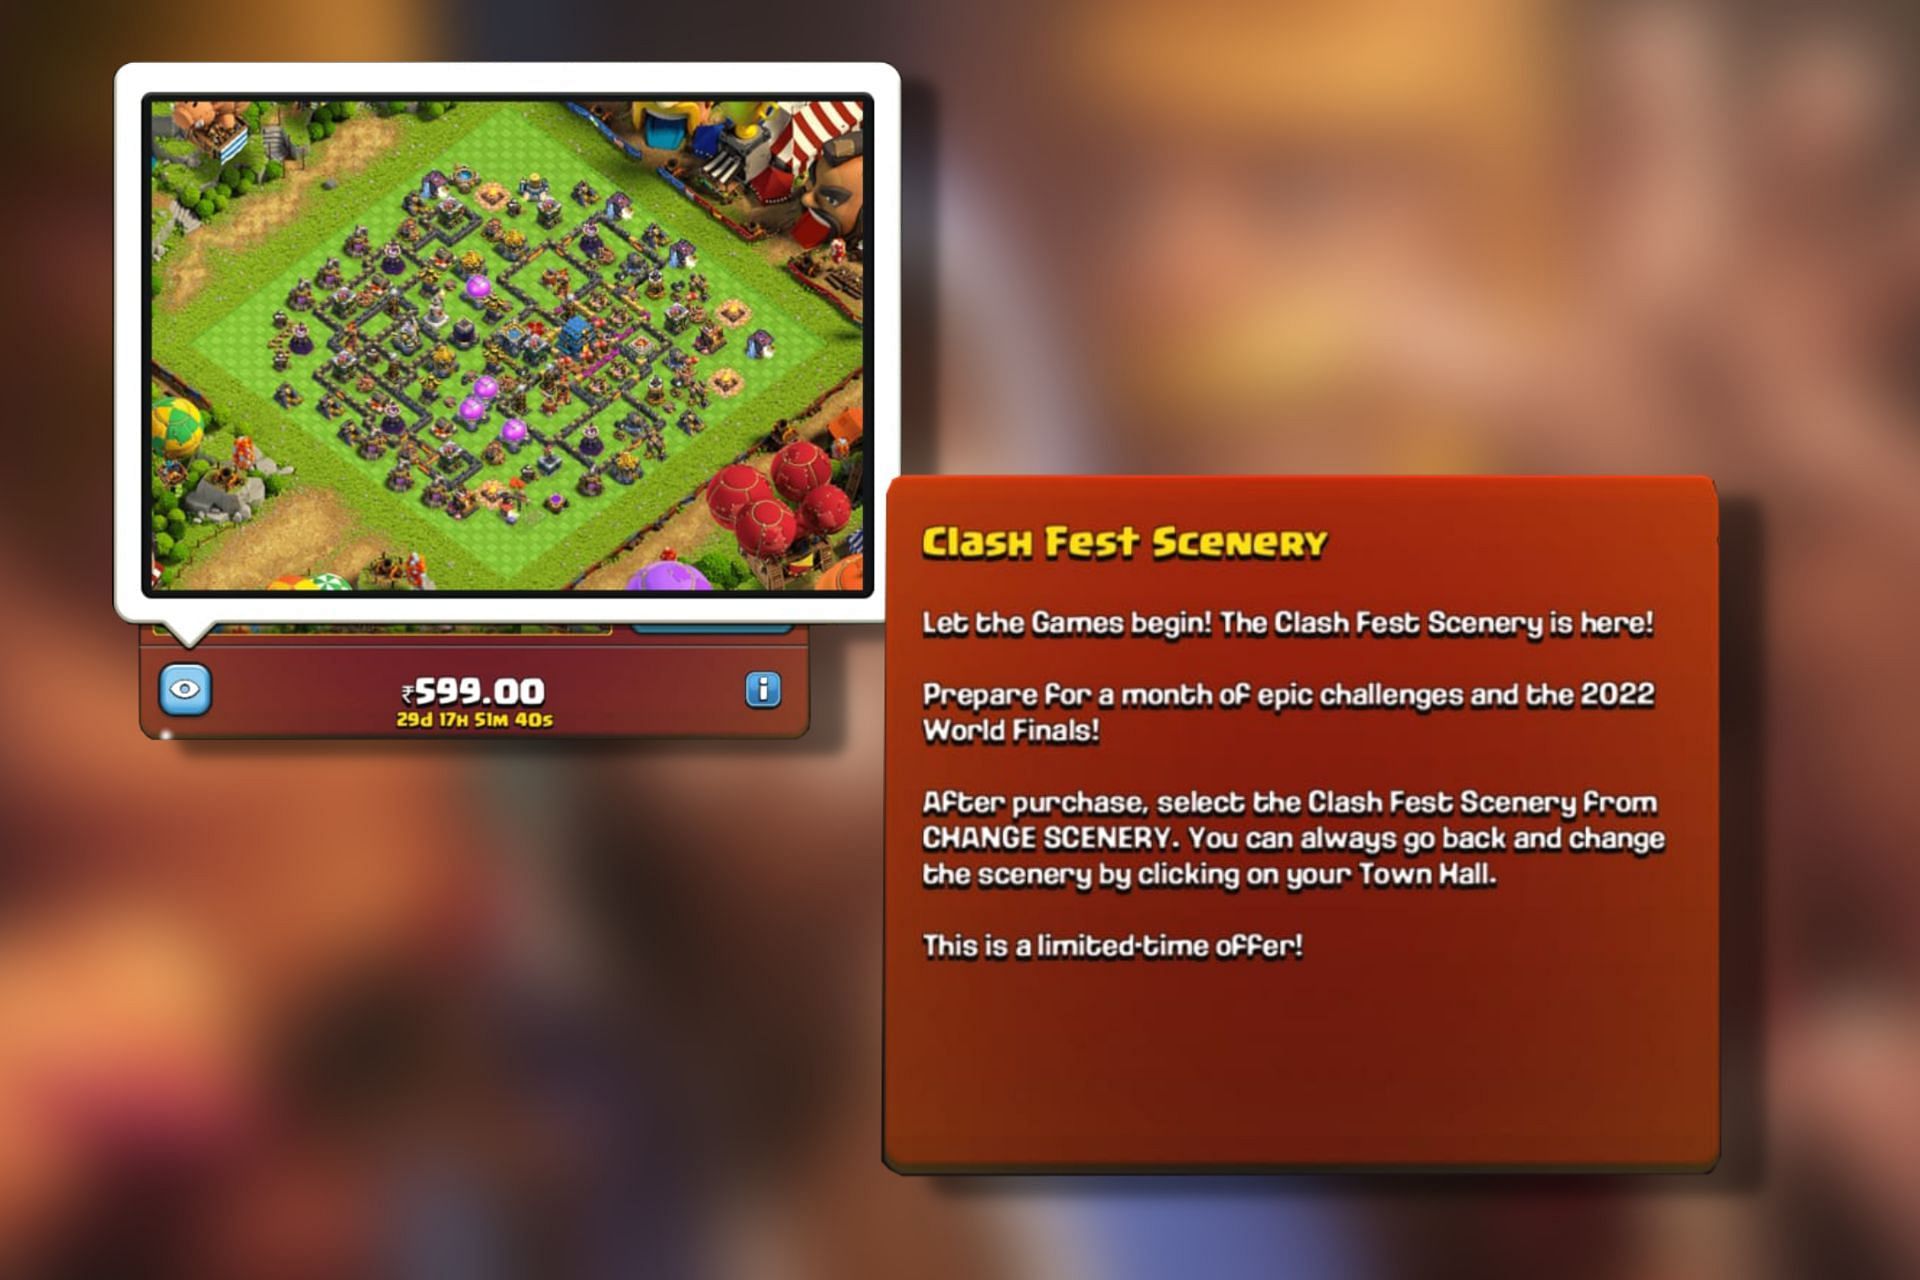 How to unlock the latest Clash Fest Scenery in Clash of Clans